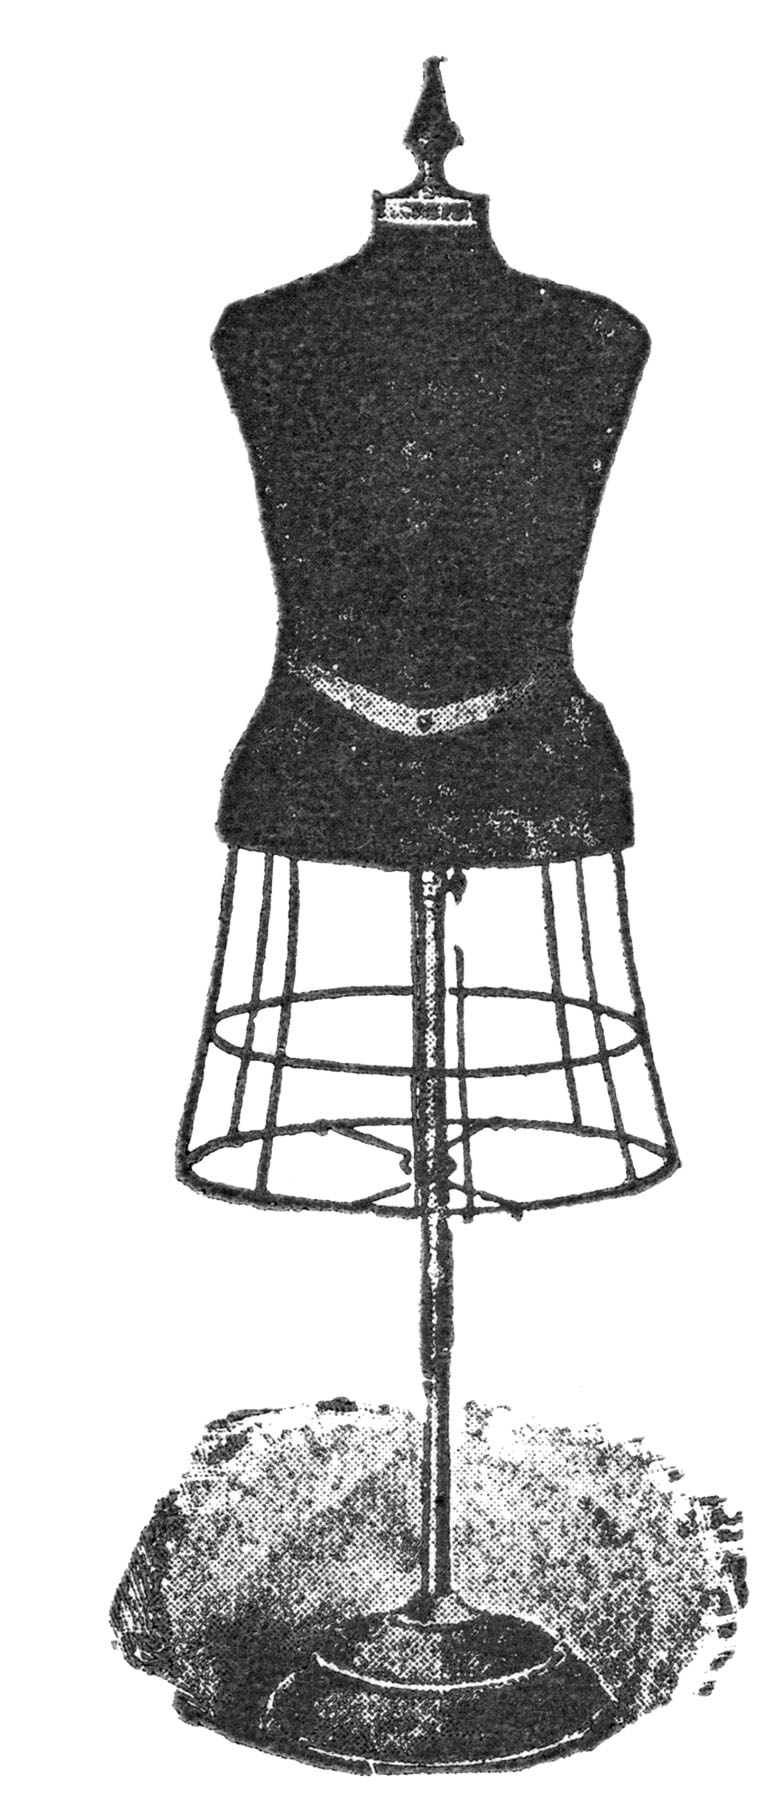 Sewing Dress Form